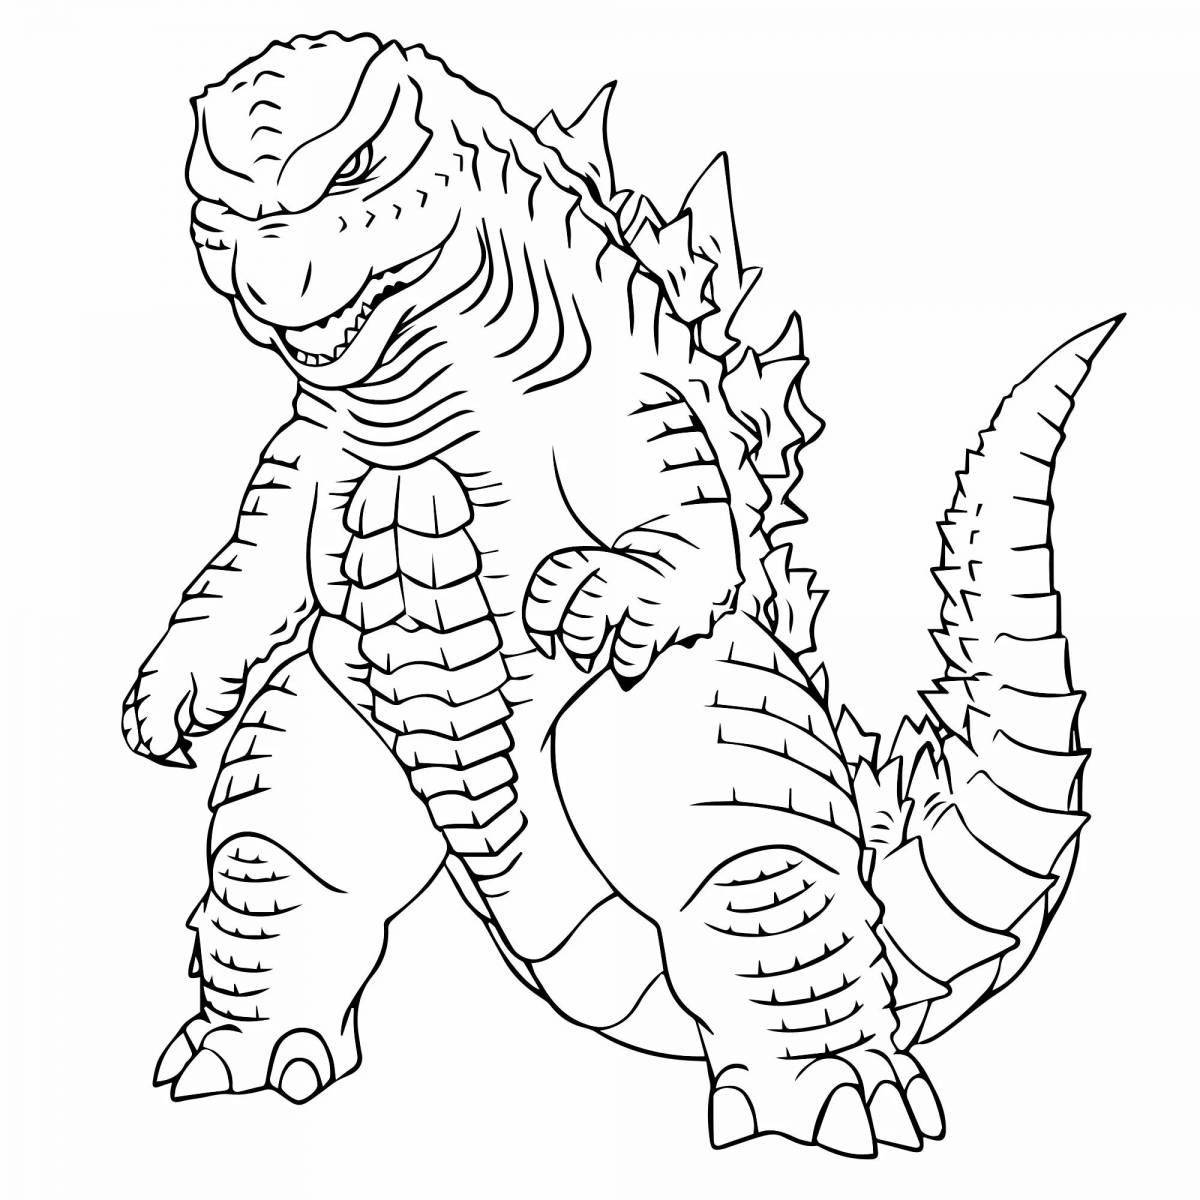 Radiant Godzilla Coloring Page for Boys